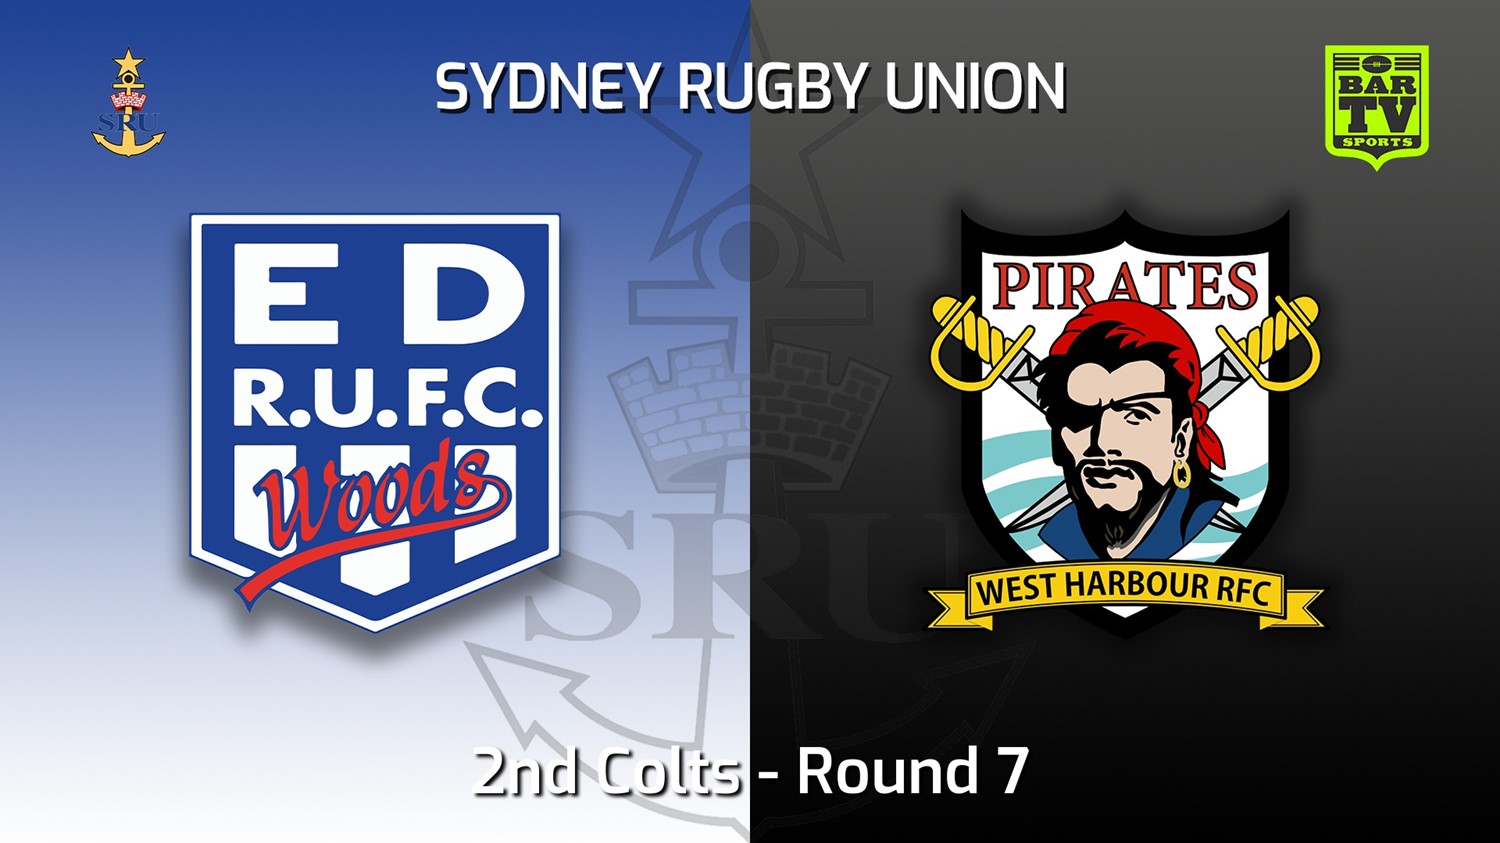 220514-Sydney Rugby Union Round 7 - 2nd Colts - Eastwood v West Harbour Slate Image